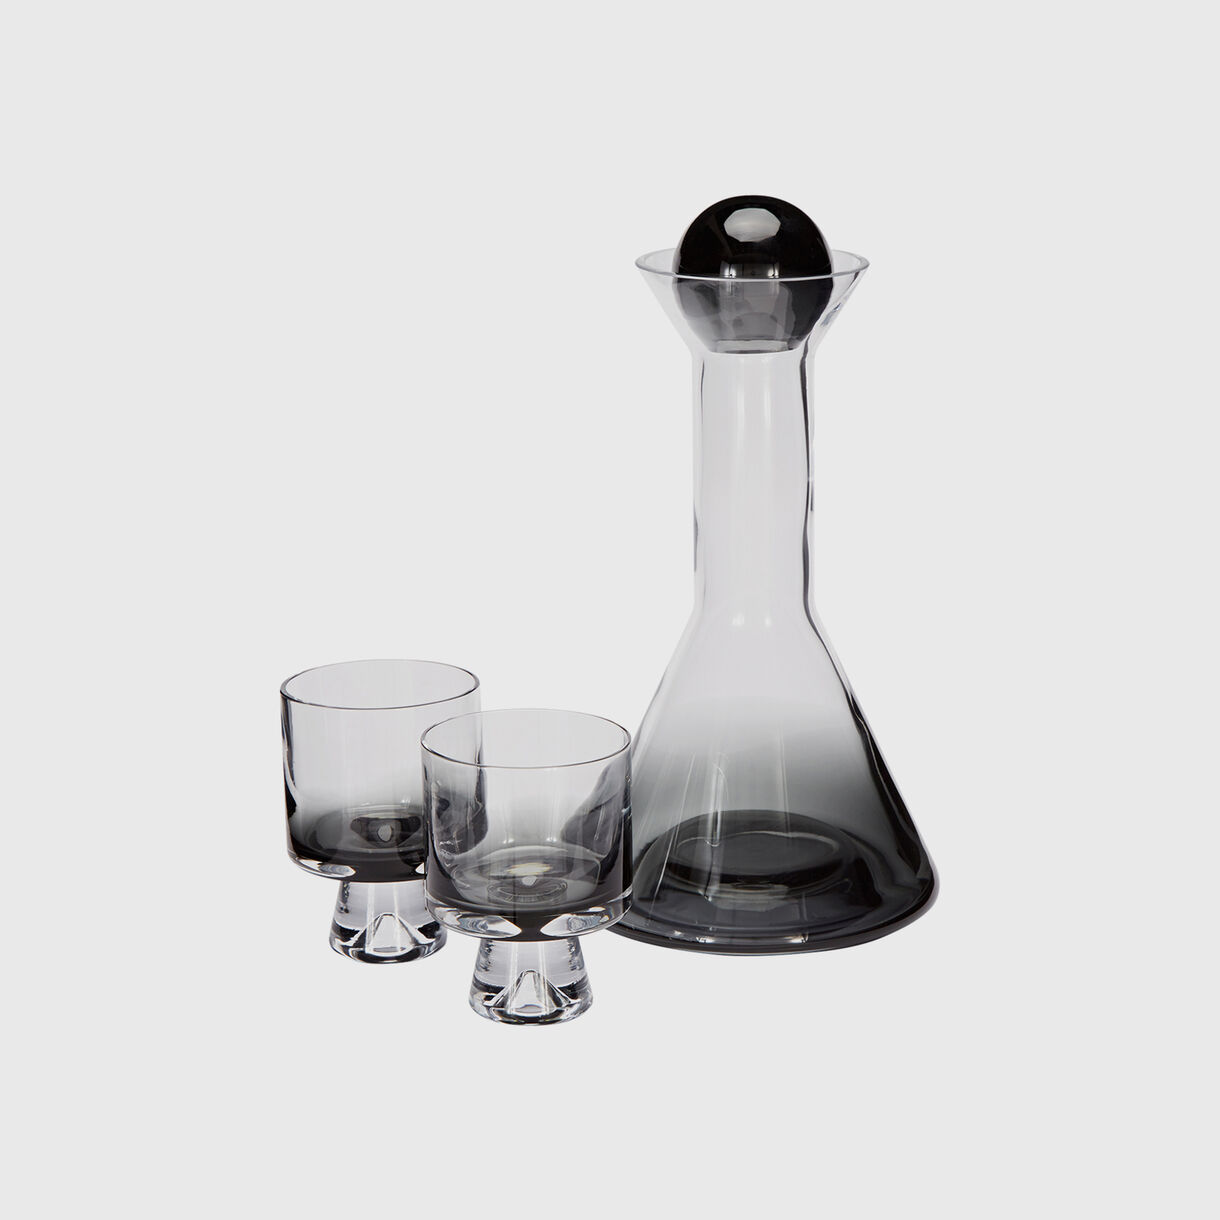 Tank Decanter, Black, with Glasses